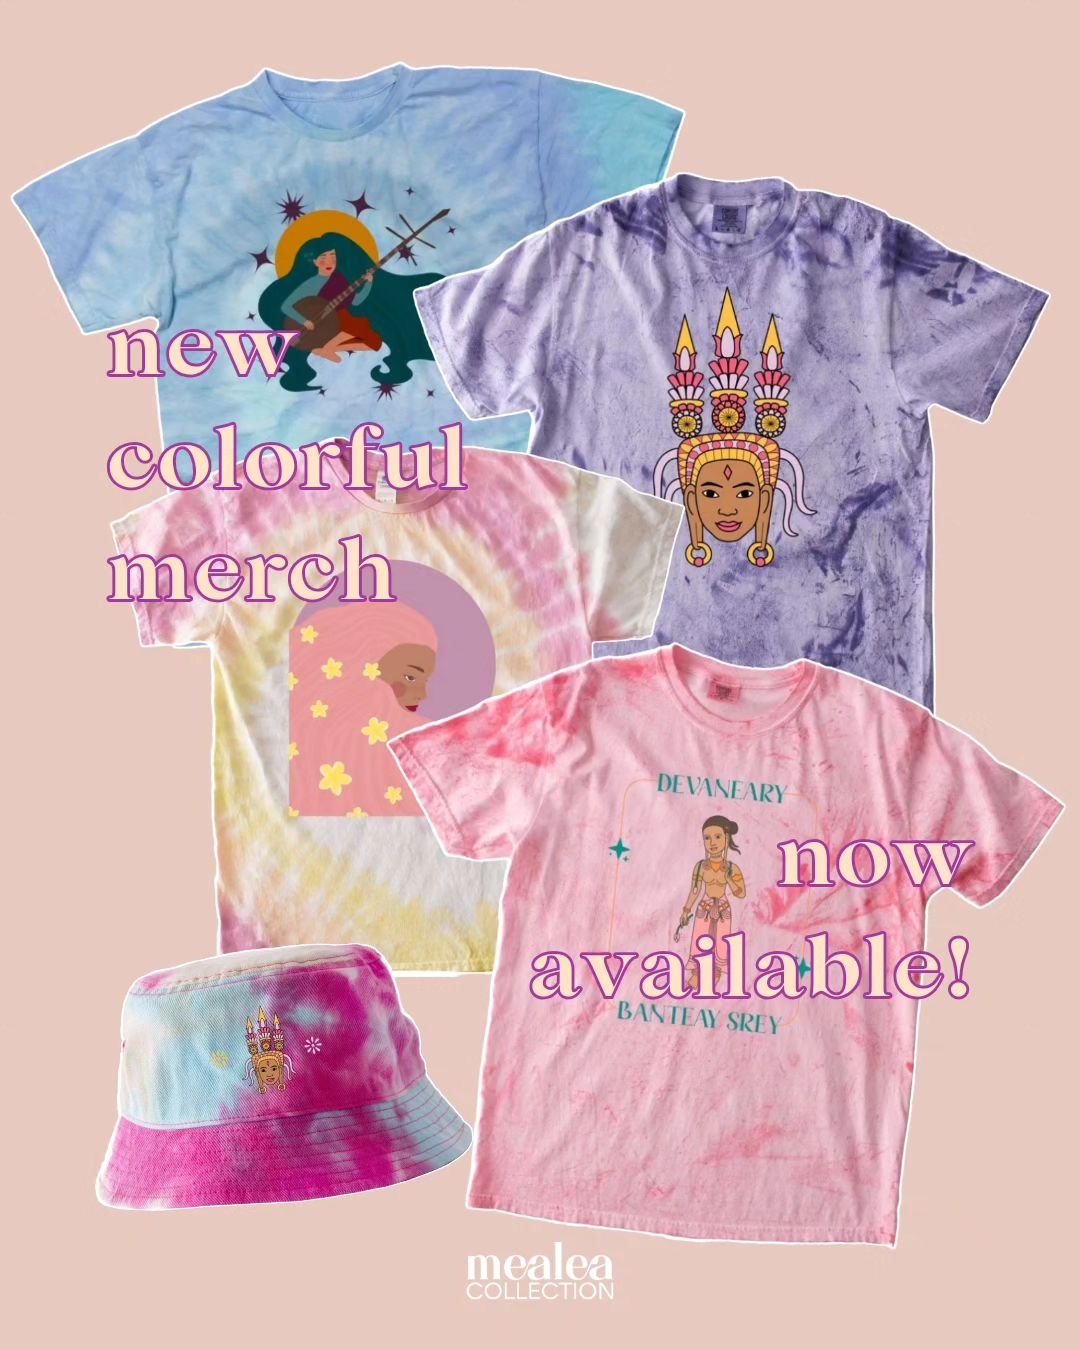 I'm back on Bonfire! But only to sell my designs using their line of colorful tie dye and color blast tees and bucket hats. For other tees and merch products, they'll be available directly on my shop. I've been working on getting art prints listed an